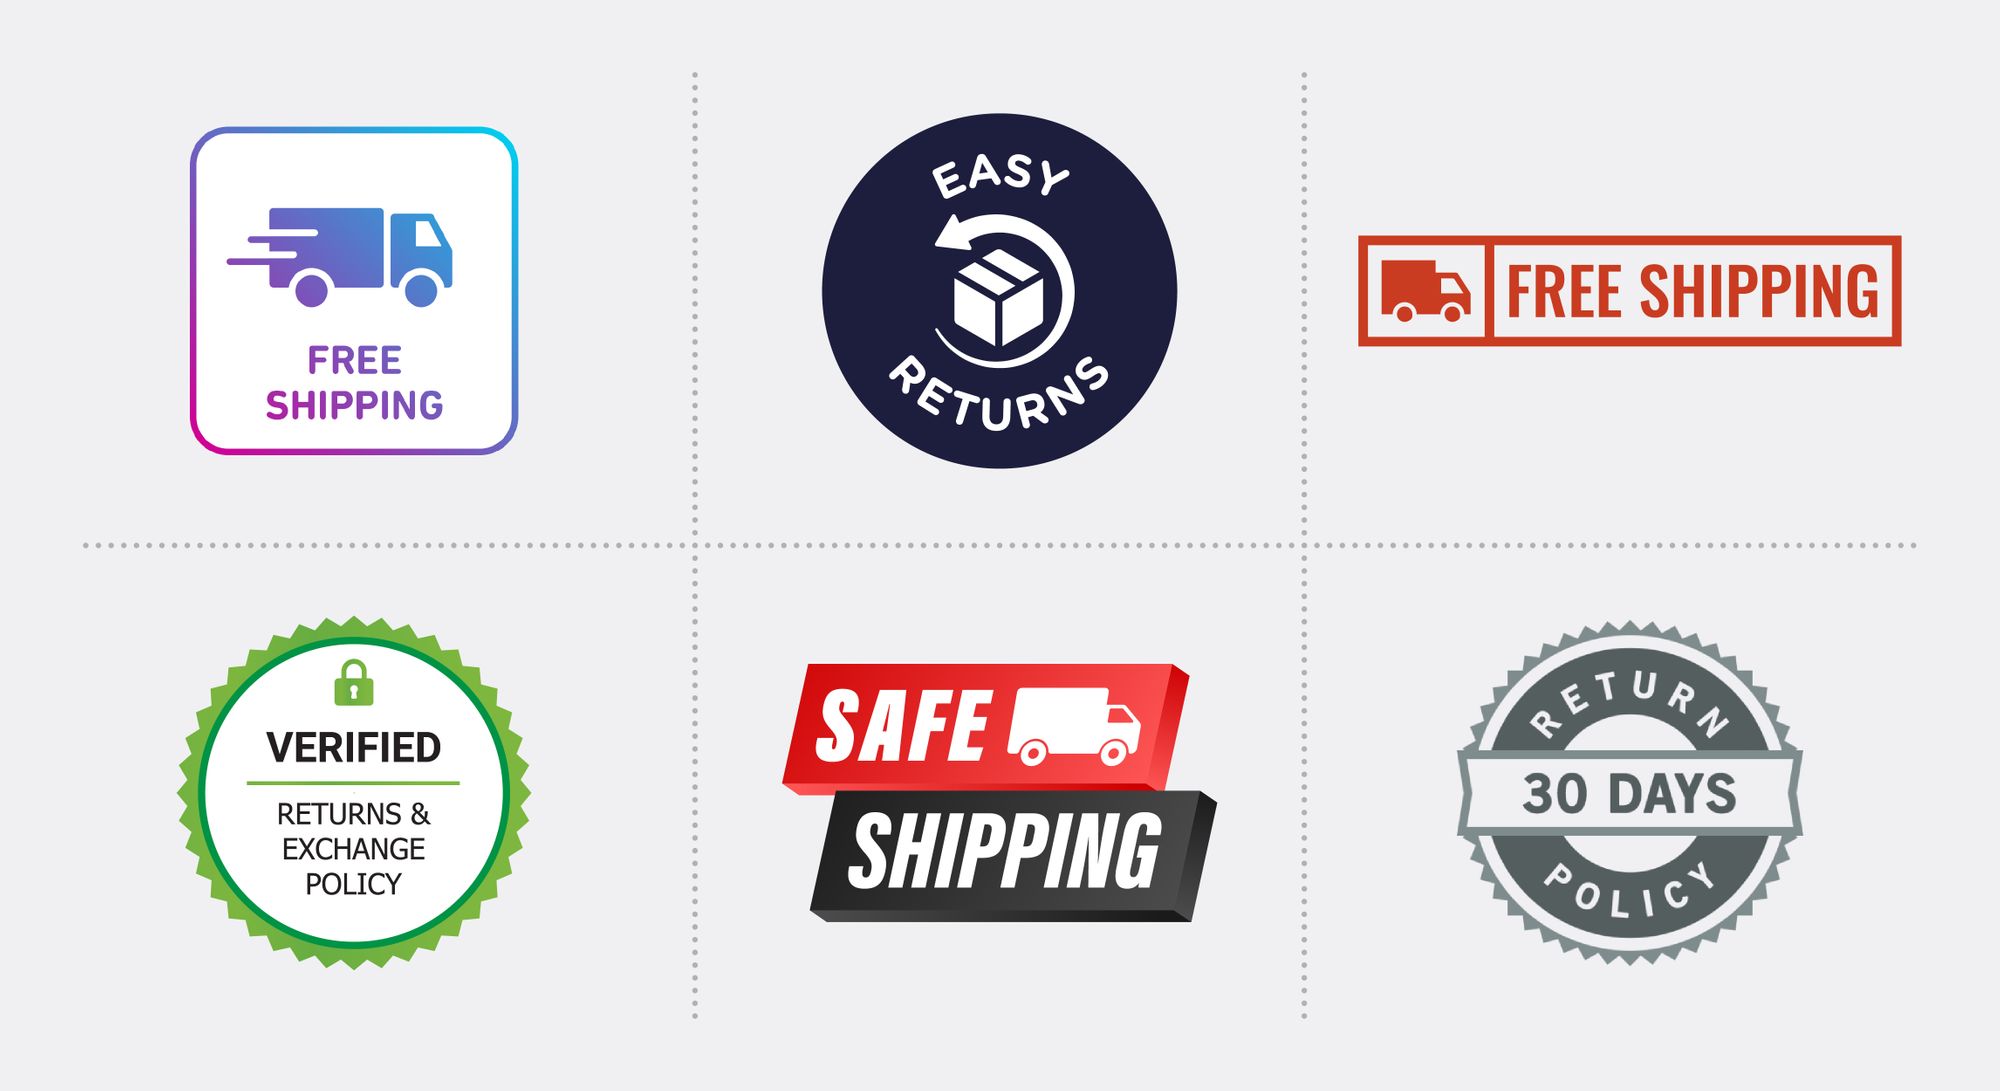 Examples of free shipping and returns trust badges: Free shipping, easy returns, verified returns and exchange policy, safe shipping, 30-day return policy